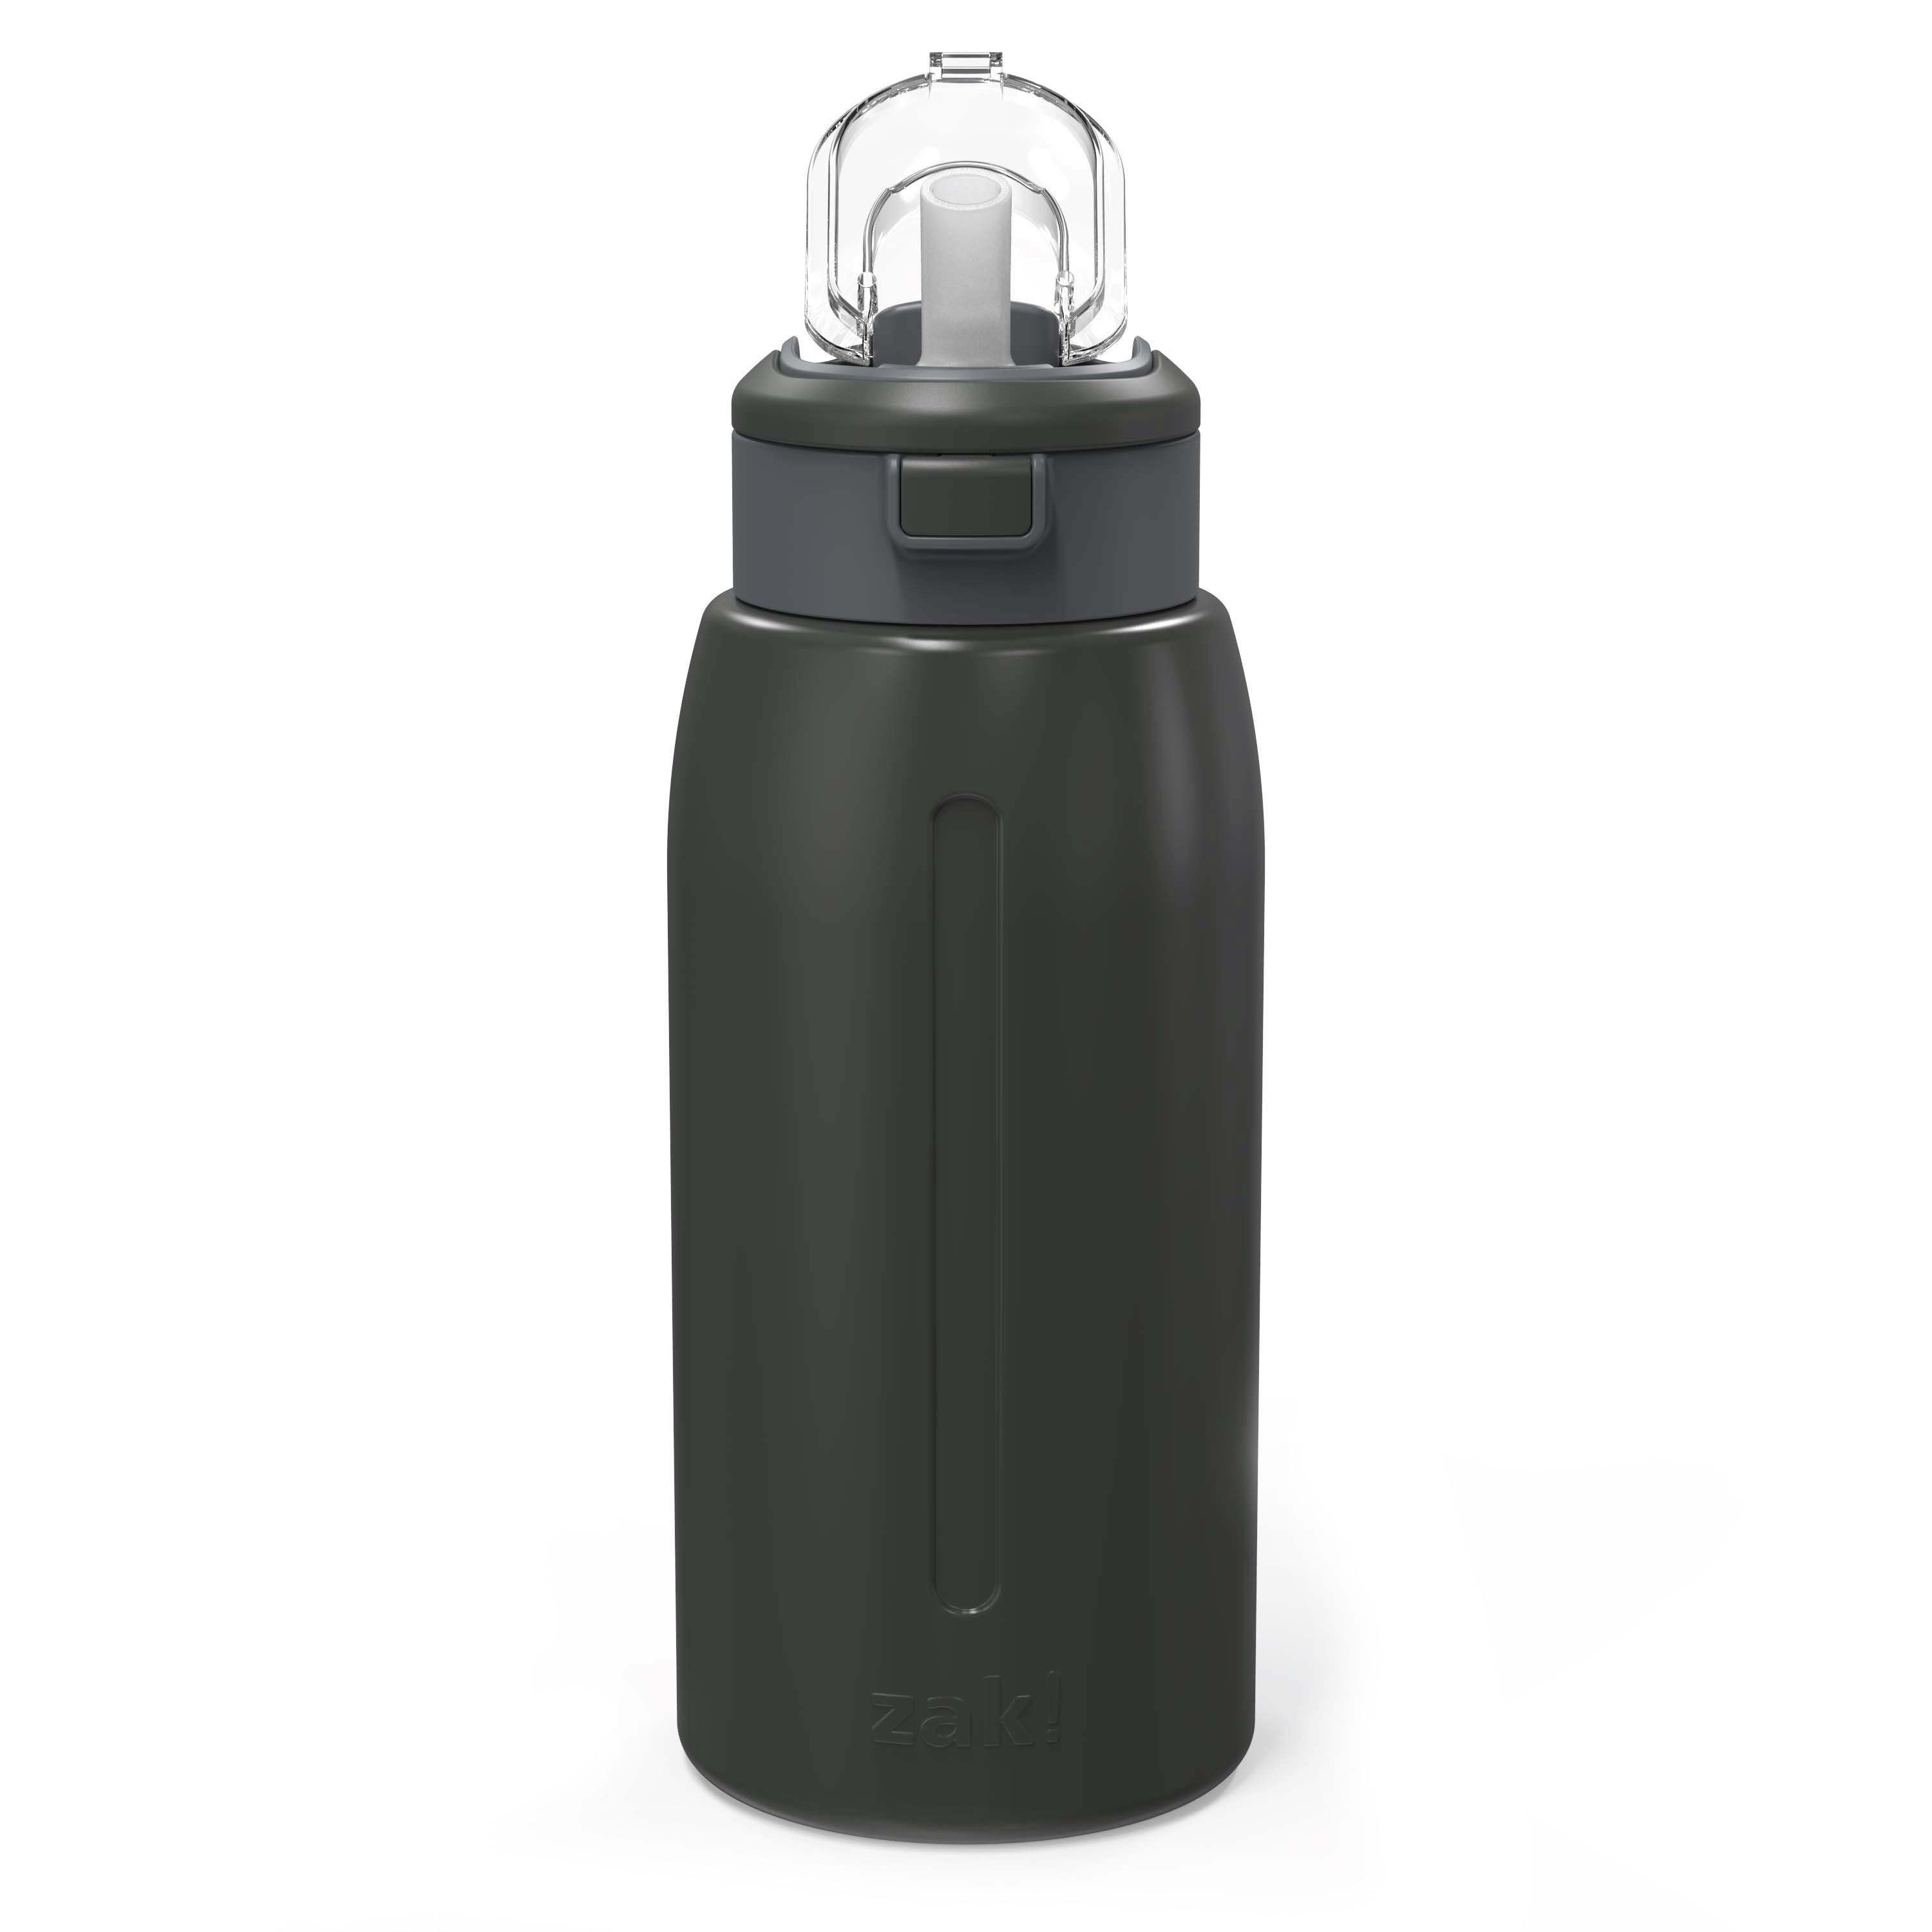 Genesis 32 ounce Stainless Steel Water Bottles, Charcoal slideshow image 3